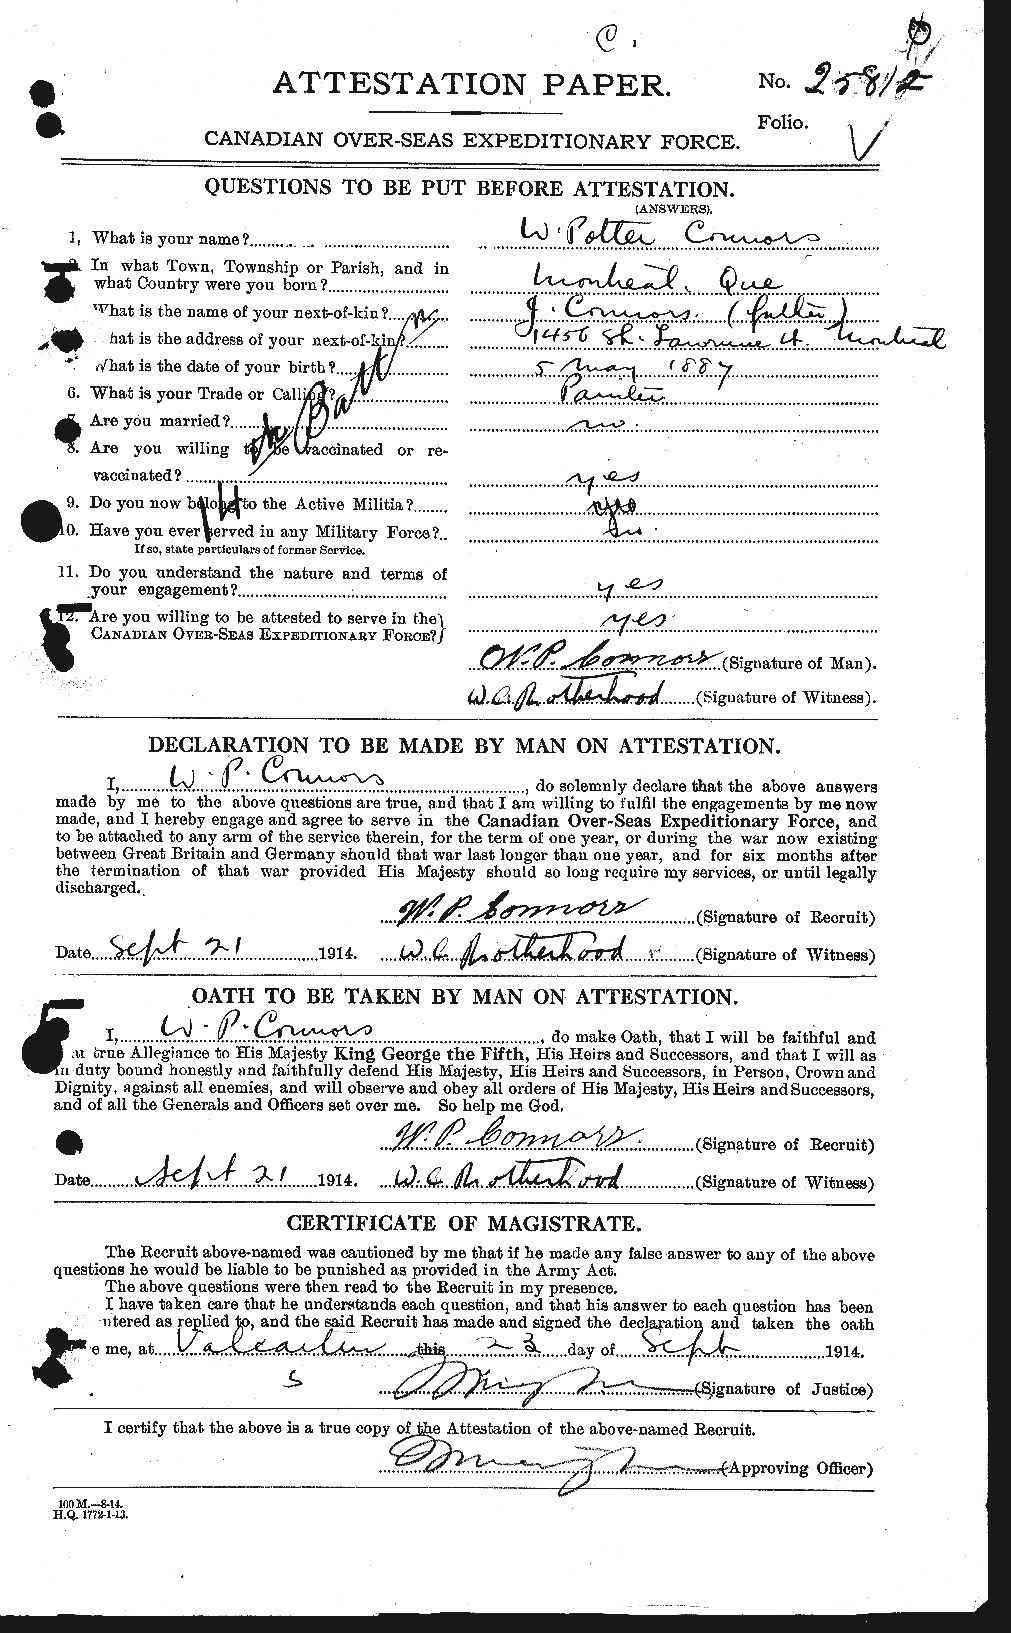 Personnel Records of the First World War - CEF 071442a